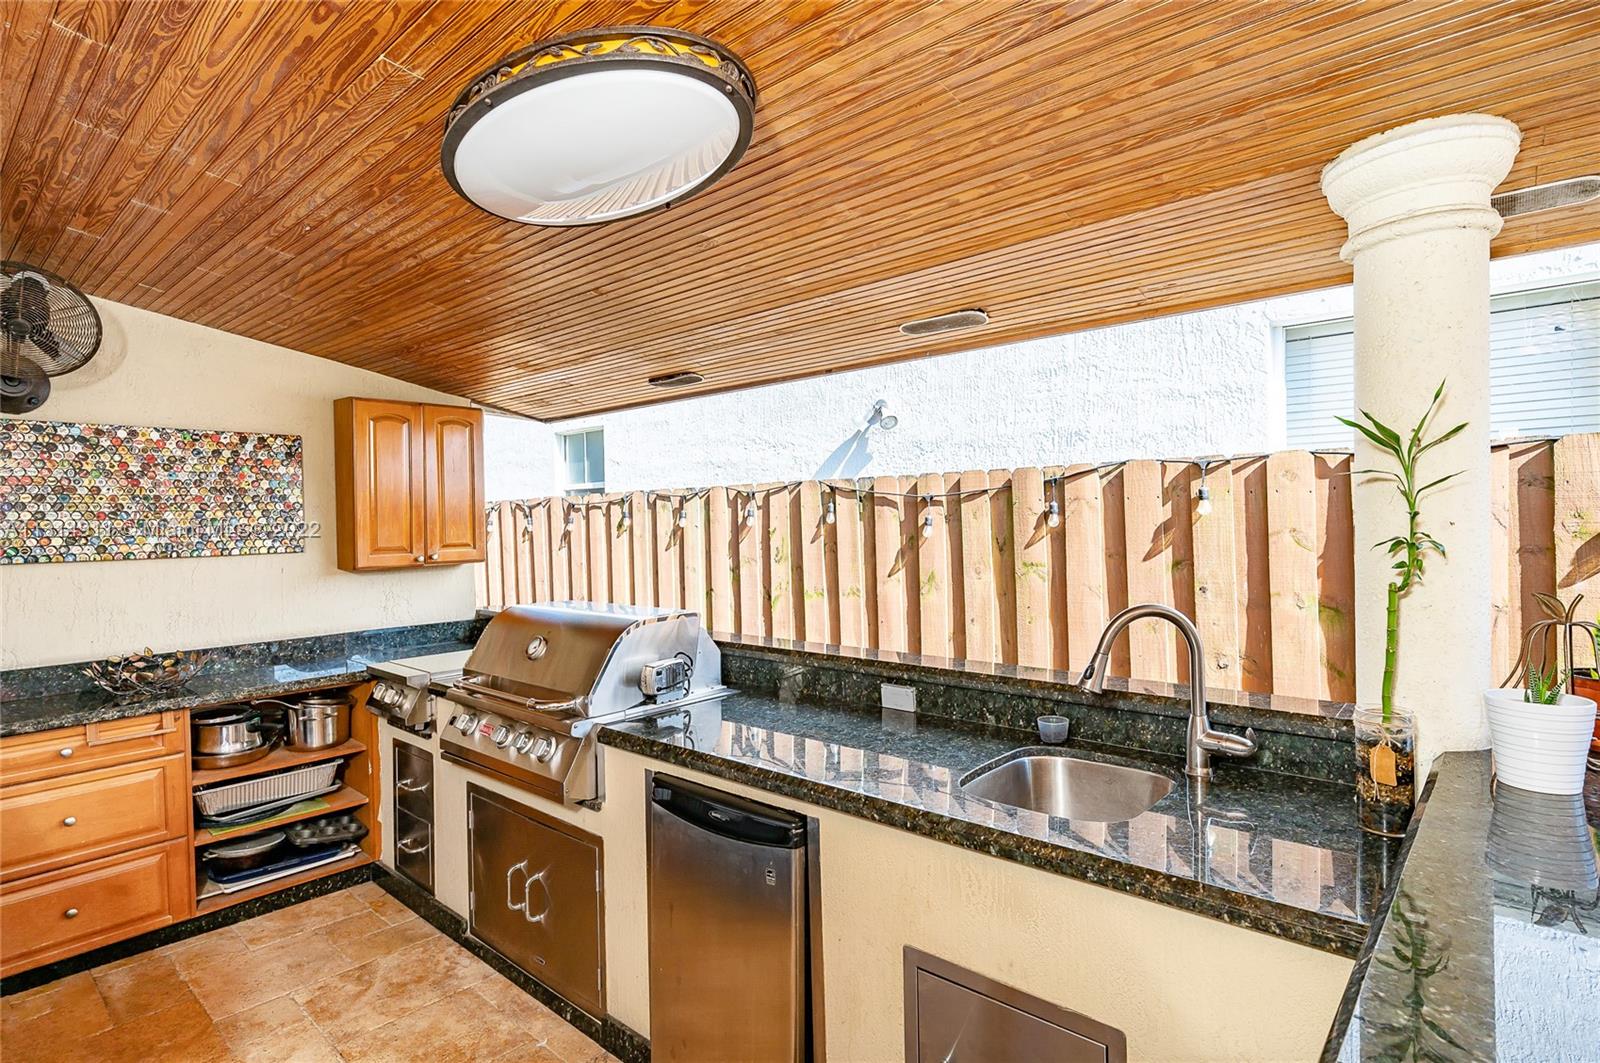 Fabulous  spacious Summer Kitchen, with all the gadgets: BBQ, burners, refrigerator, sink and bar counter.